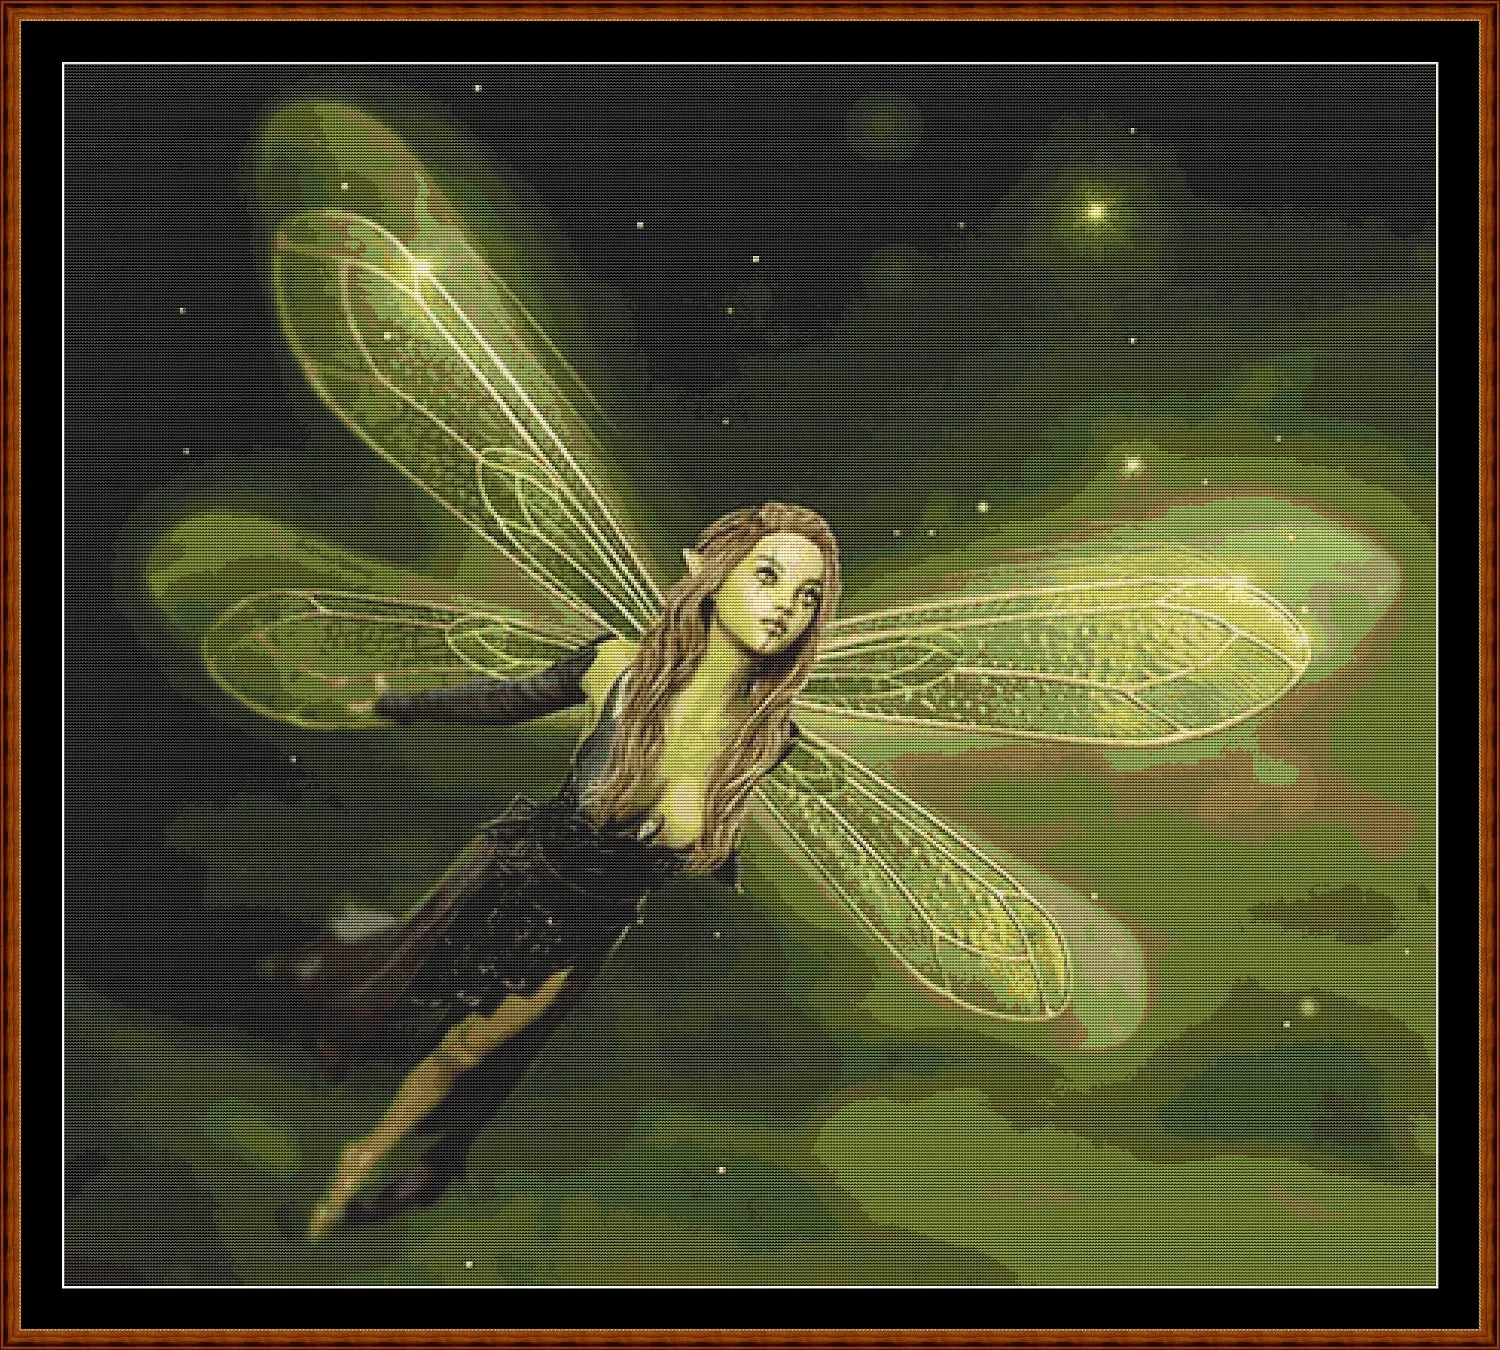 Little Green fairy patterns are expertly created from art by Stefan Keller (Kellepics) under Public Domain CC0 license